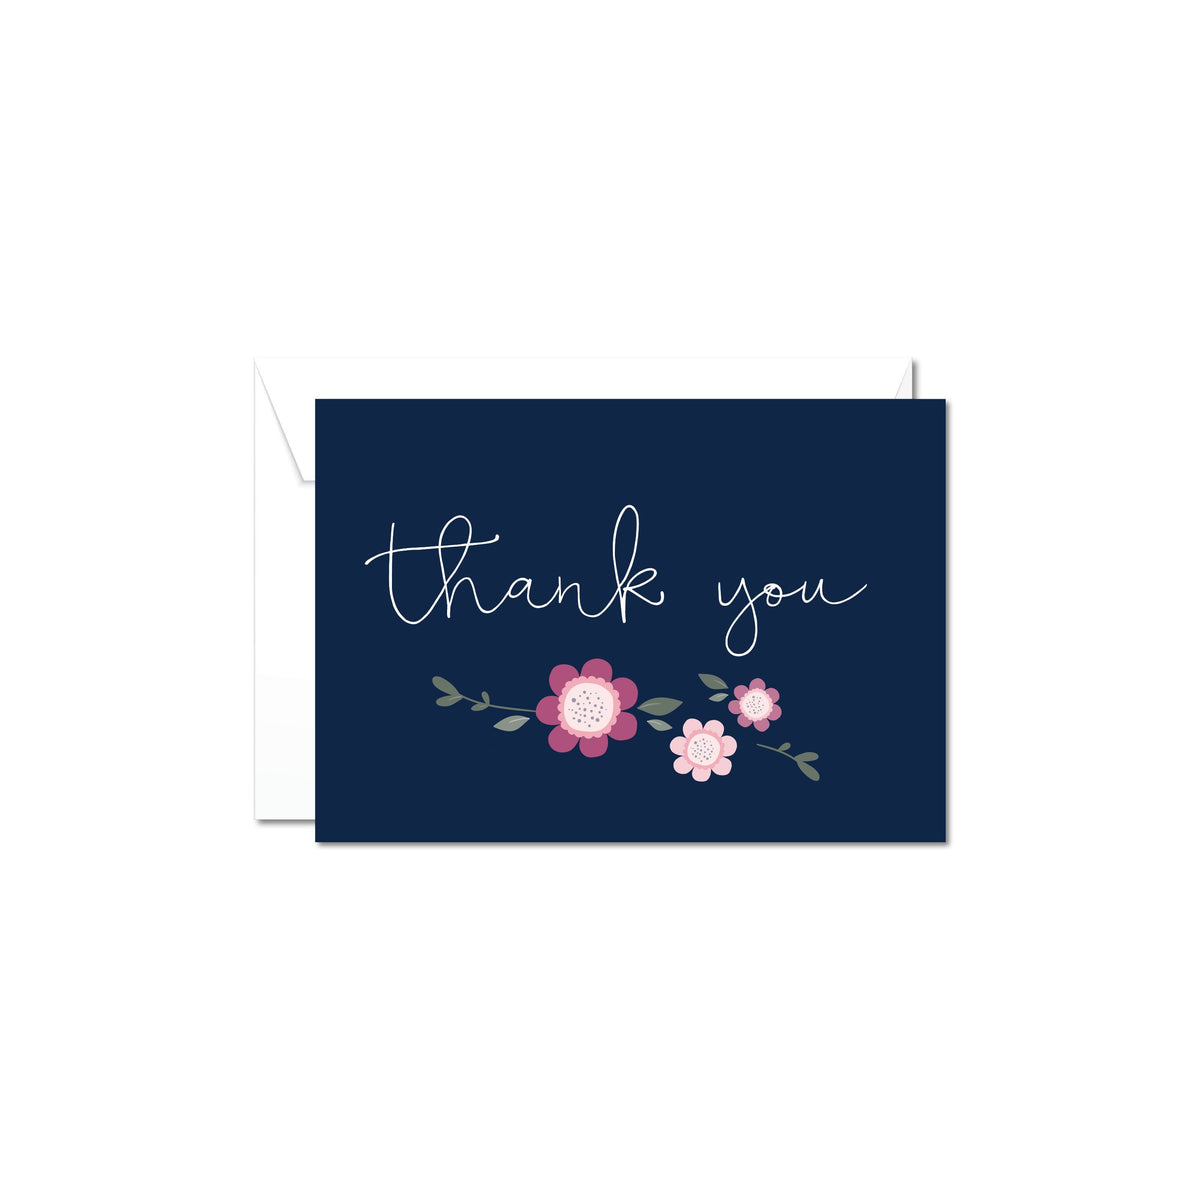 A Thank You Gift Card to accompany your Boxsmith Gift Box. Easy delivery NZ wide of our online gift collection.